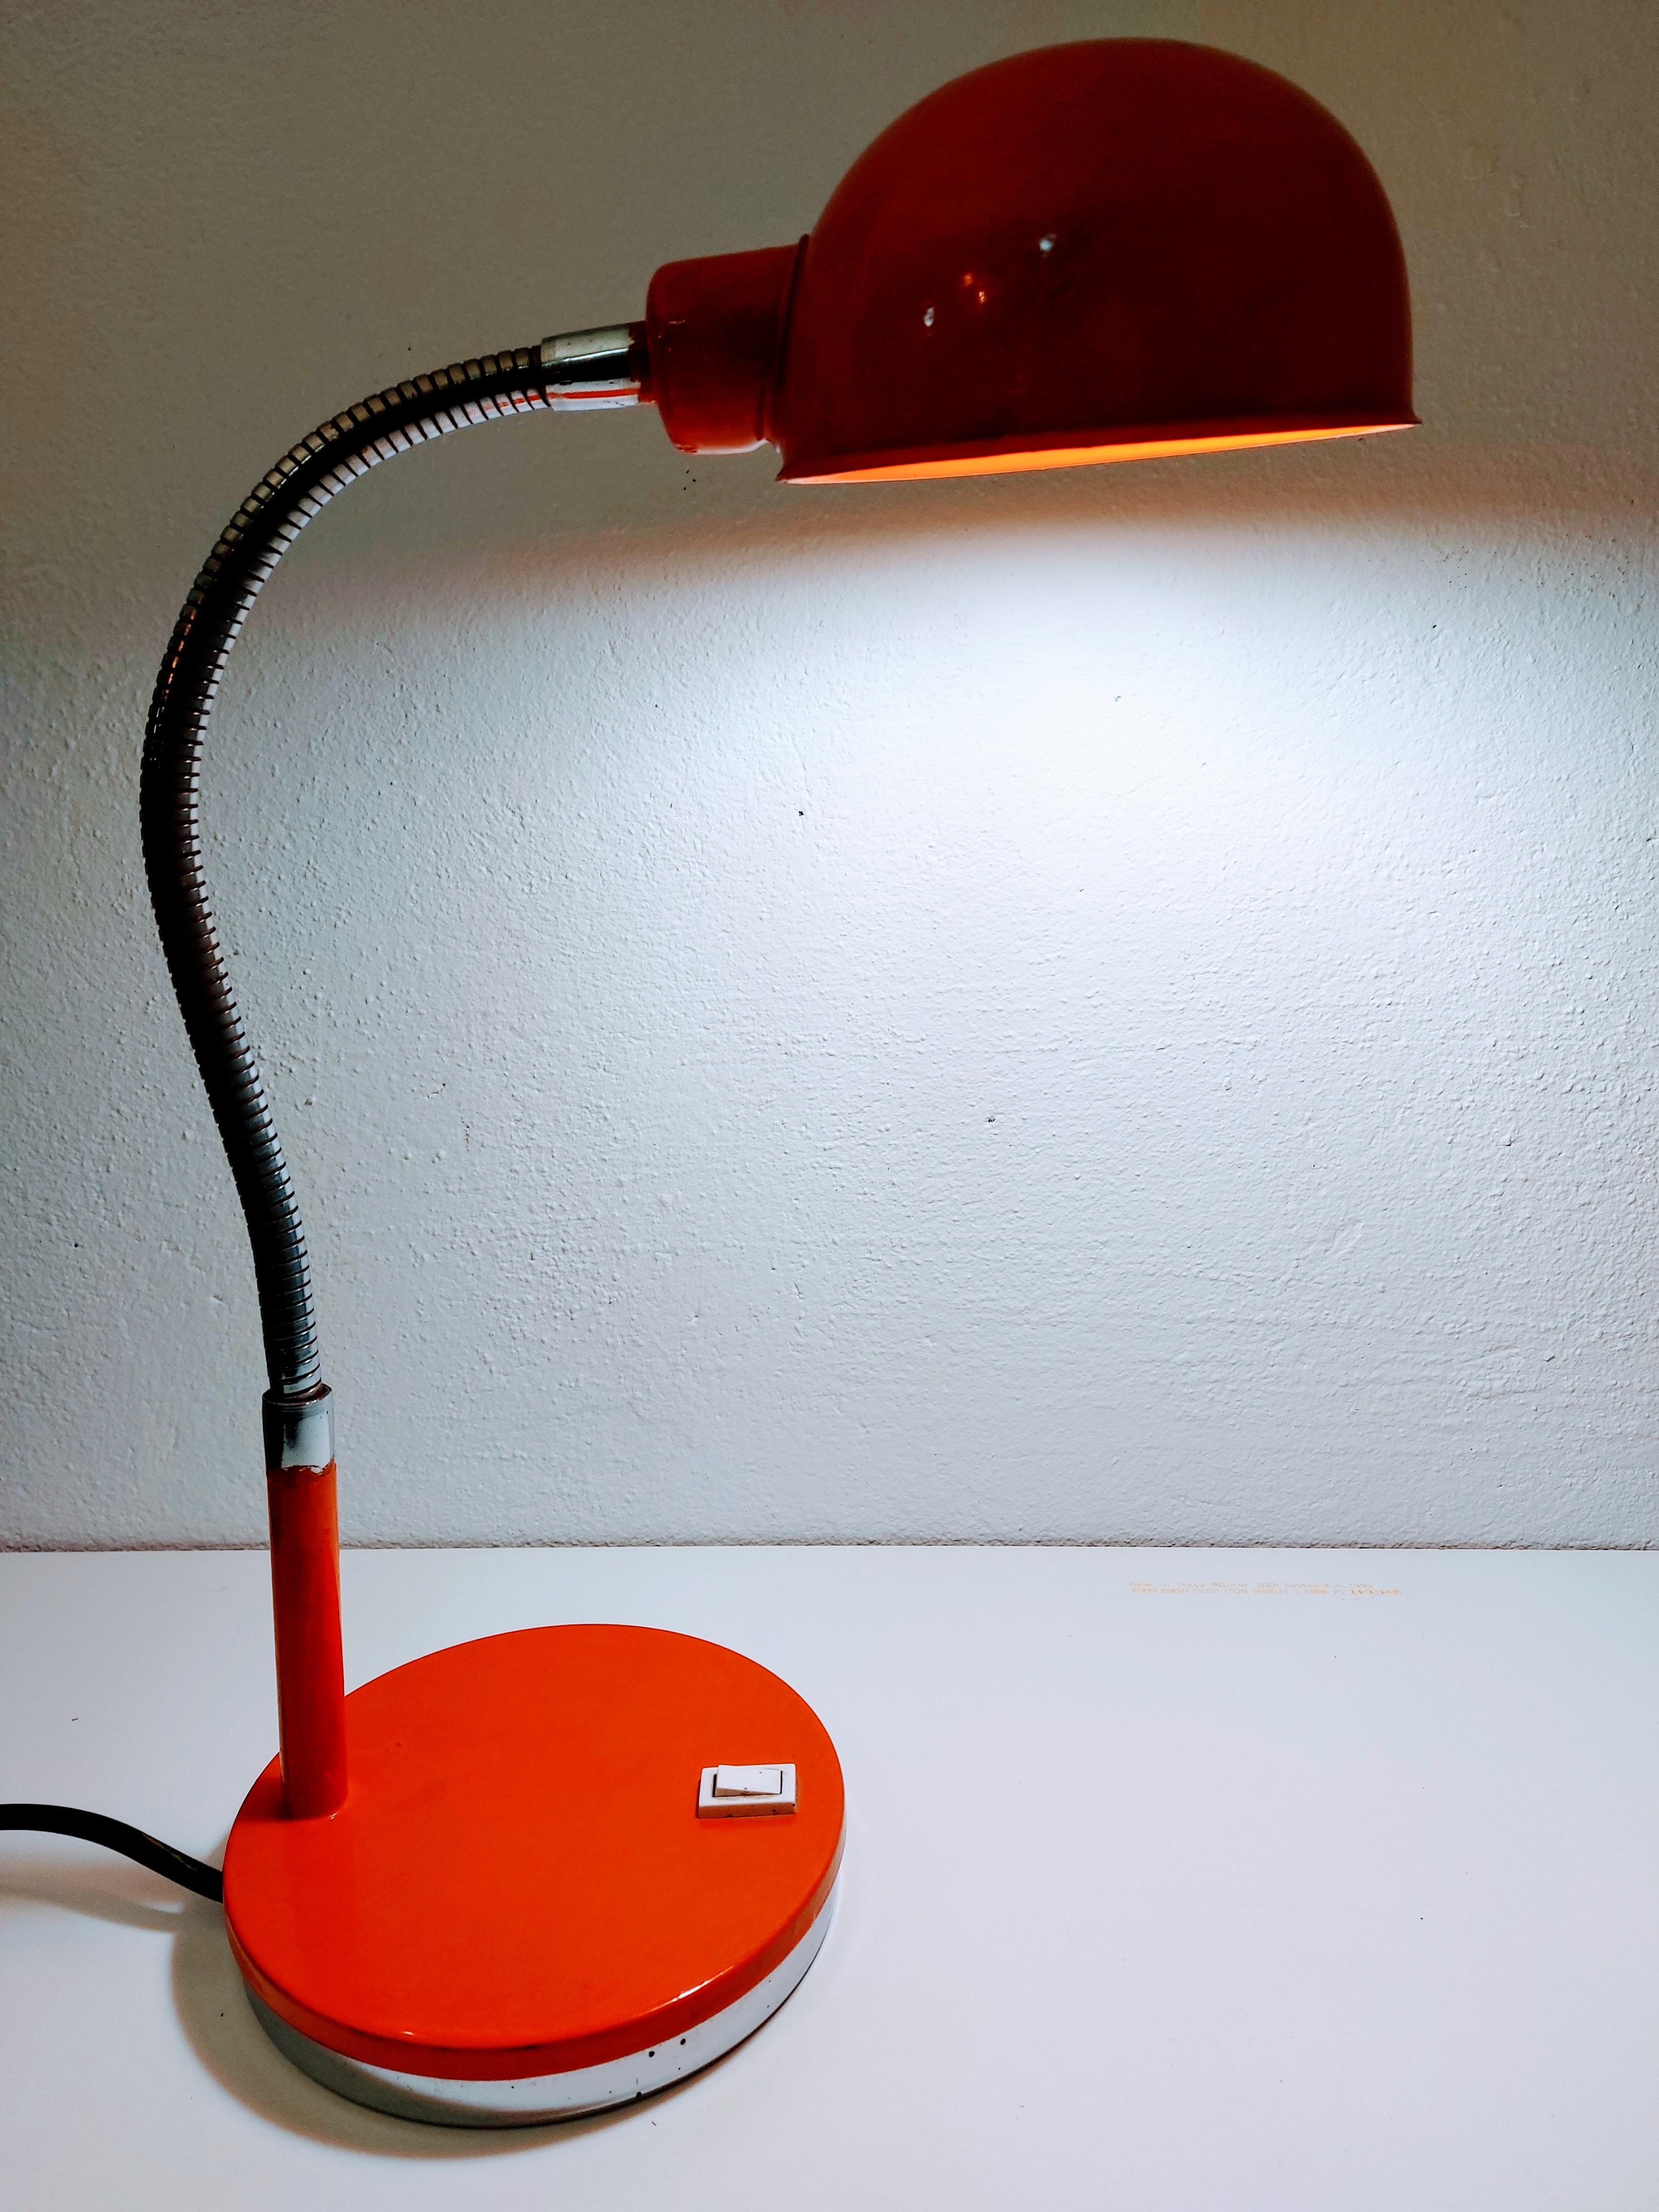 Vintage table lamp

Colour: Orange

Material: metal

Period: 1970s

Style: Industrial.